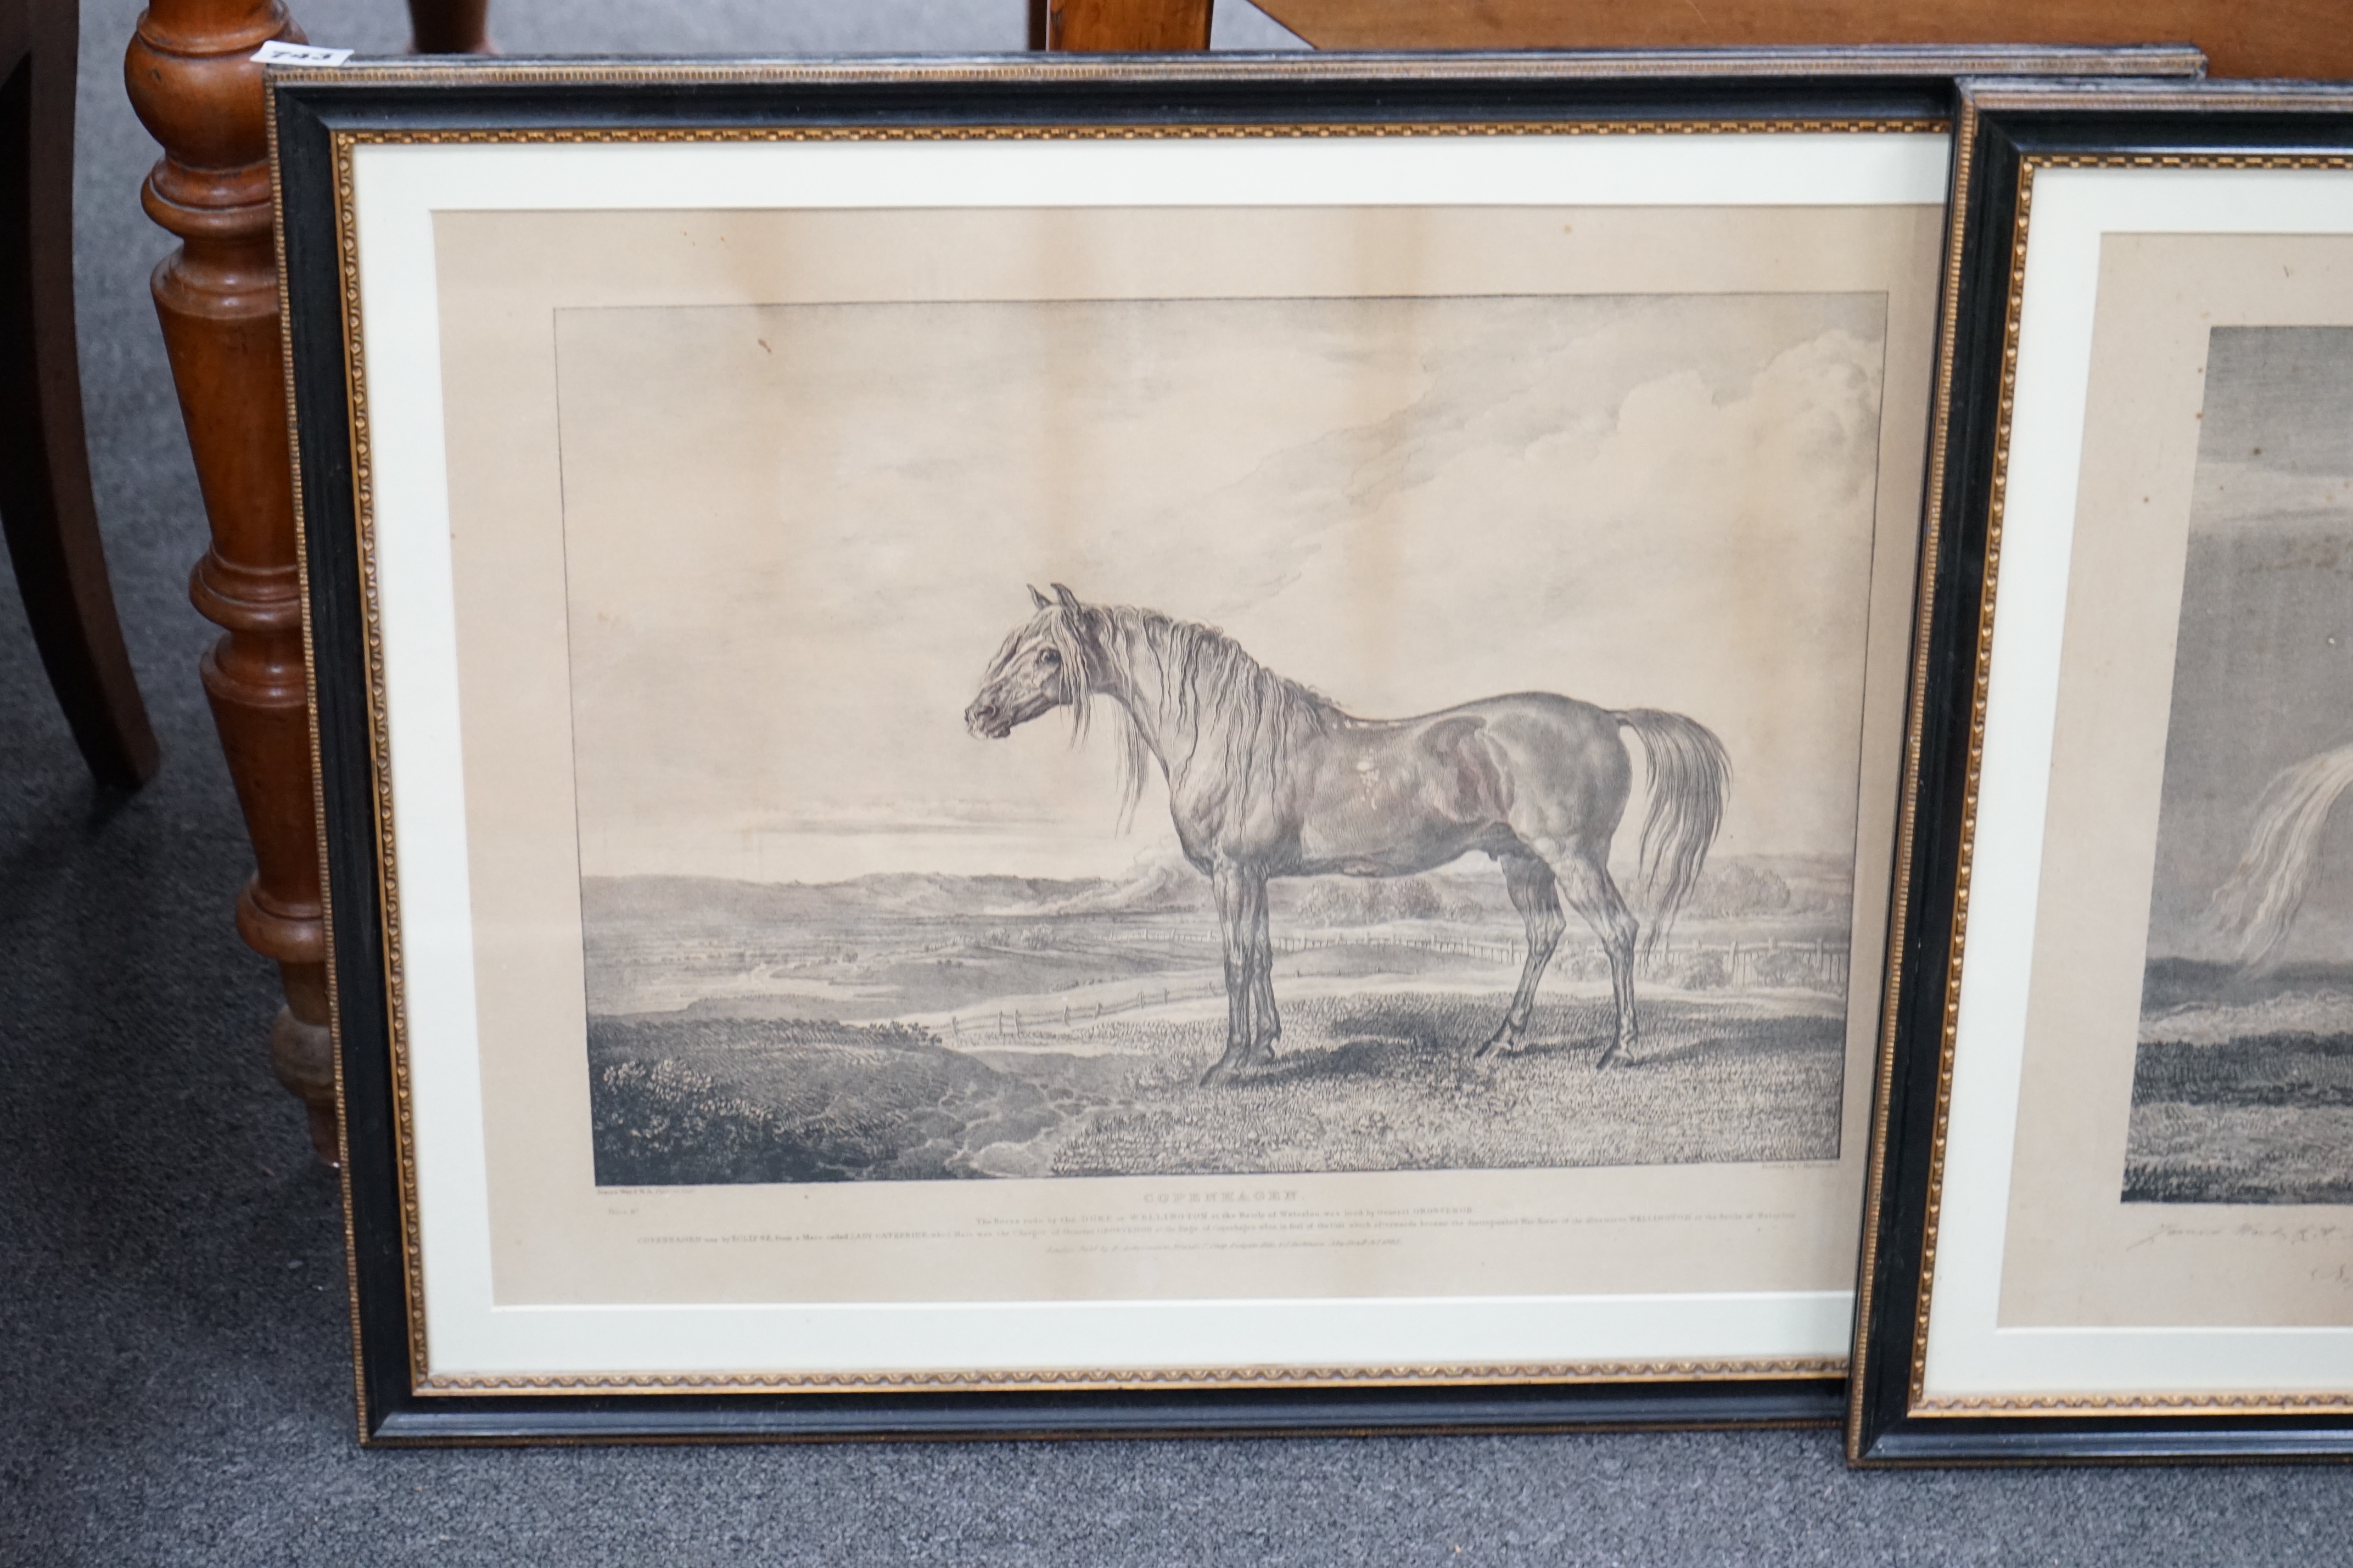 After Rudolph Ackermann (1764-1834) and James Ward (1769-1859), two black and white engravings, 'Copenhagen' and 'Marengo', Wellington and Napoleon's horses, largest 43 x 54cm